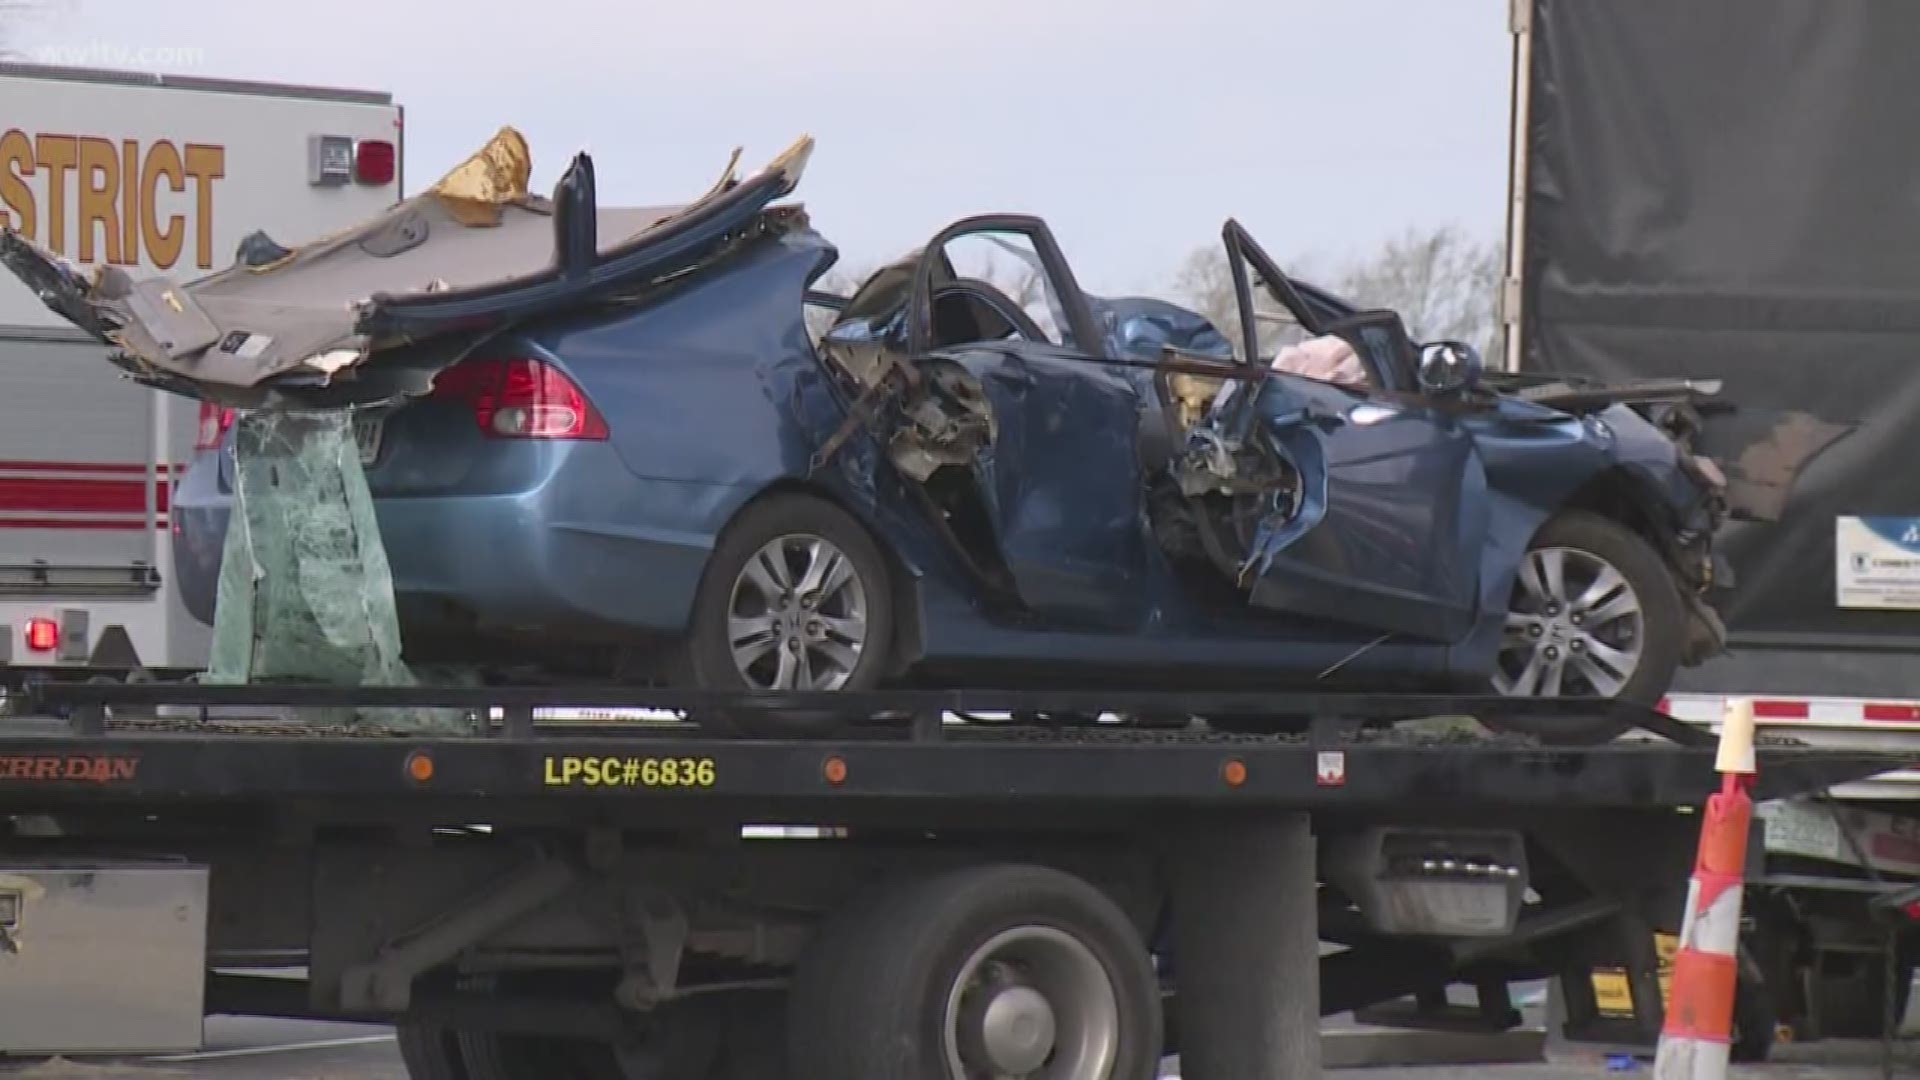 The driver and one passanger were killed after the car veered into a semi truck parked on the shoulder.